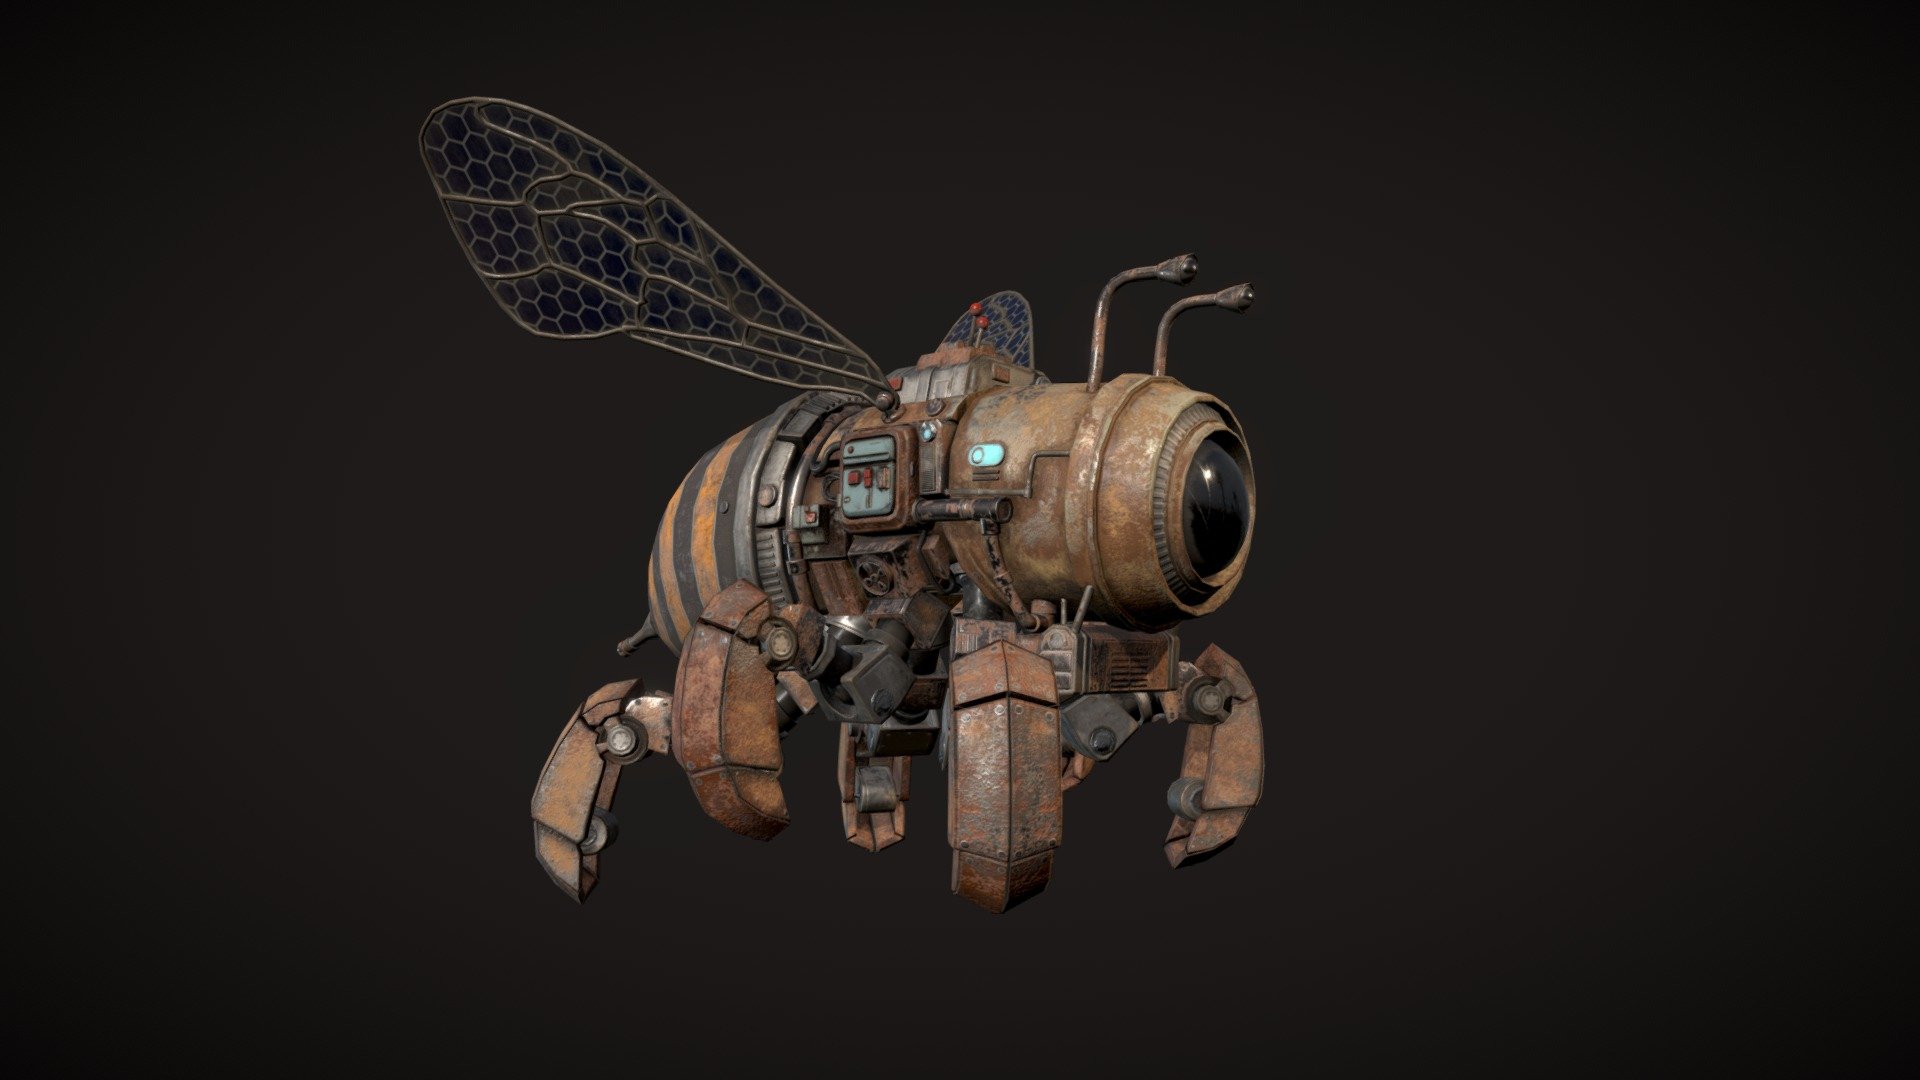 A little BeeBot I made for the Rustborn universe of DAE for the course Game Asset Pipeline. Concept made with the help of AI (photobash).

Made in Autodesk Maya, Substance Painter and Photoshop by me 3d model